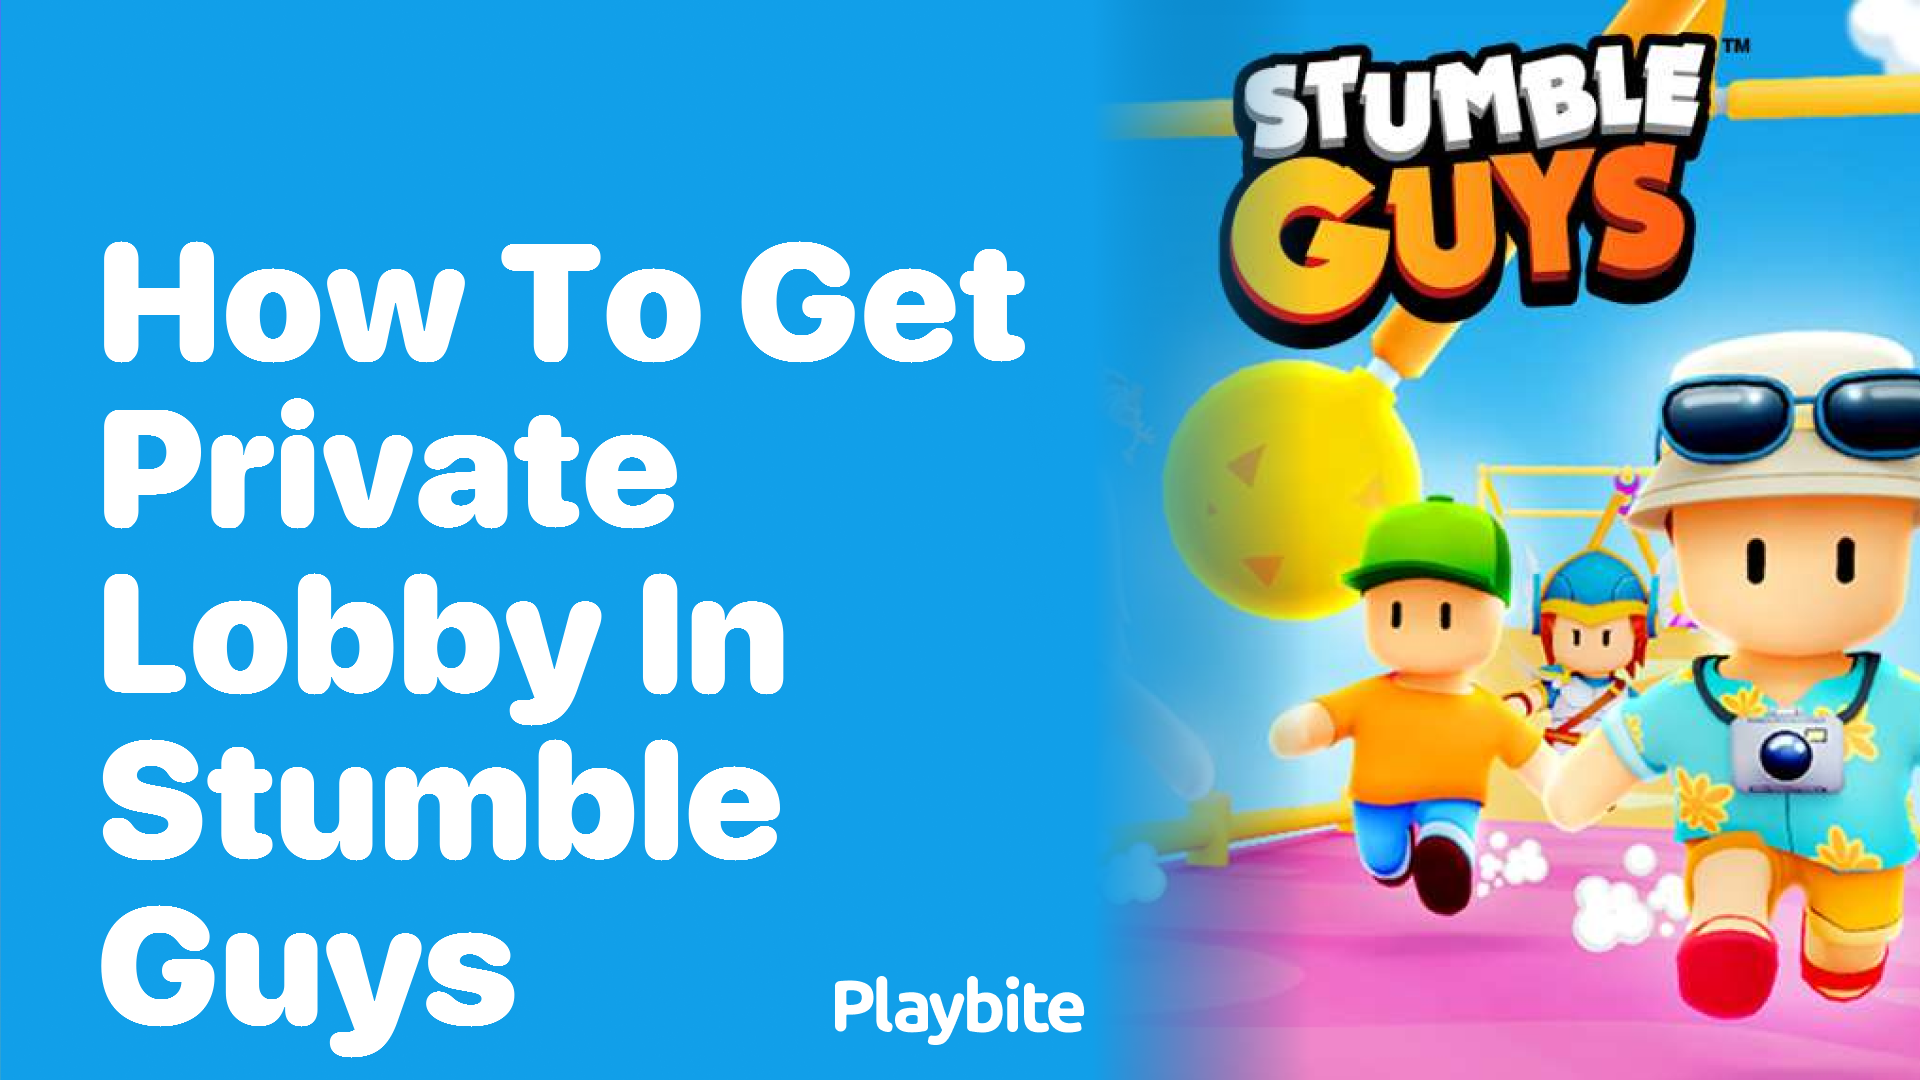 How to Get a Private Lobby in Stumble Guys